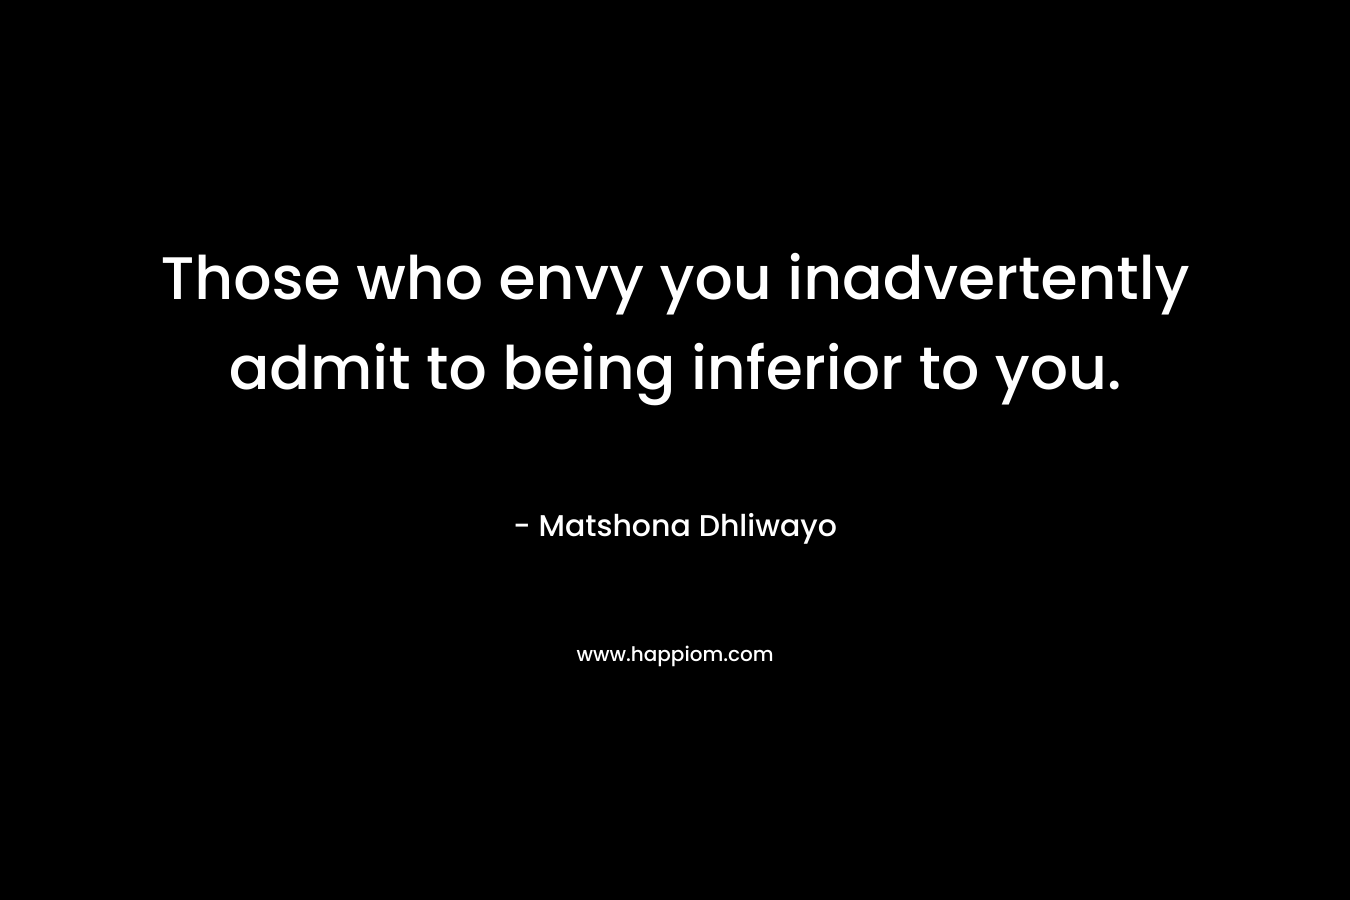 Those who envy you inadvertently admit to being inferior to you.